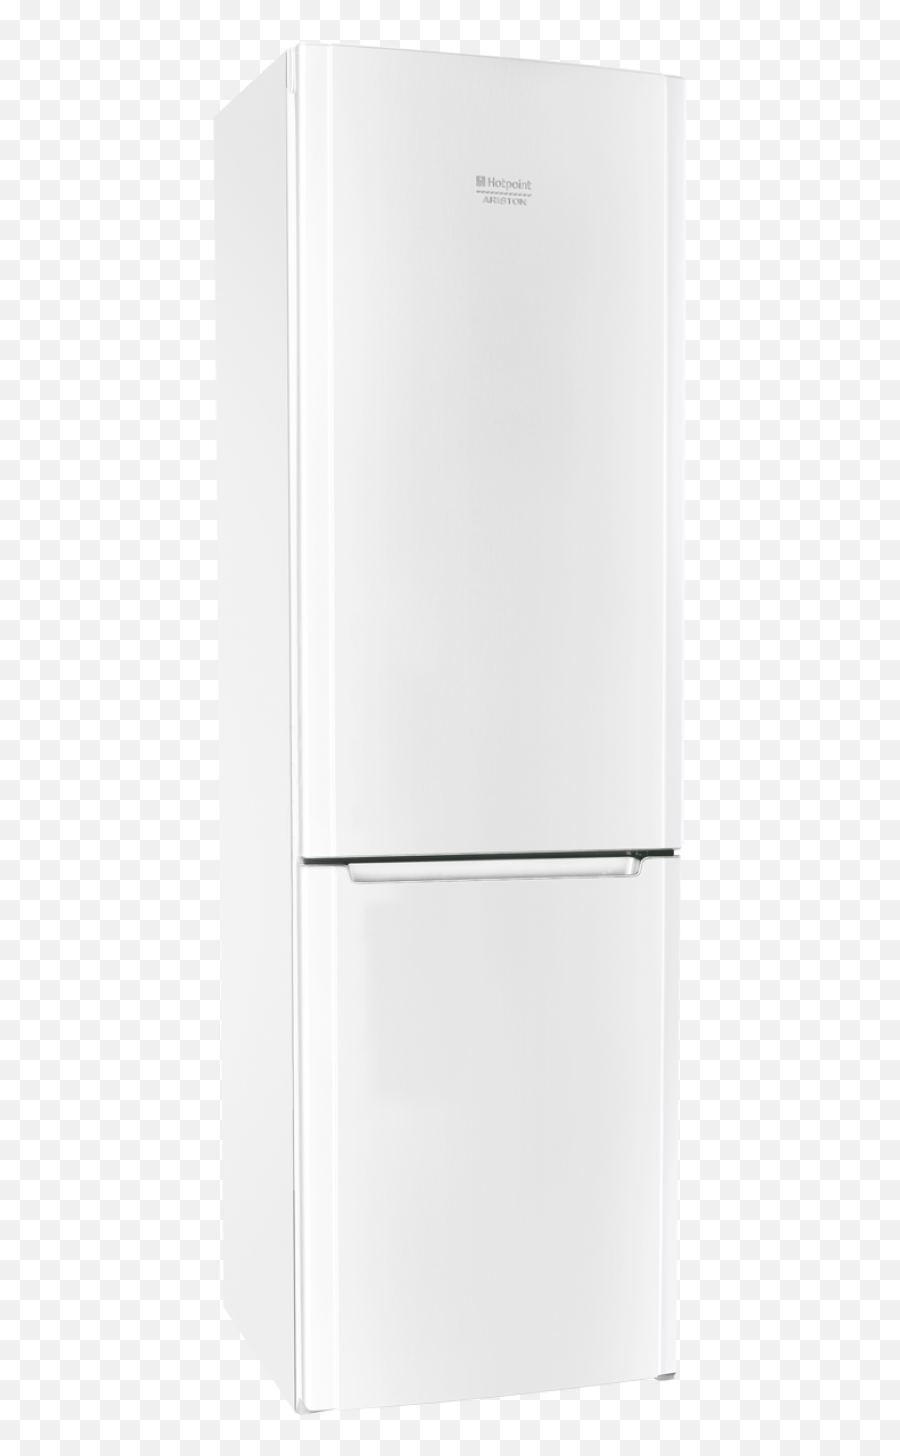 Refrigerator Png Image - Refrigerator,Refrigerator Png